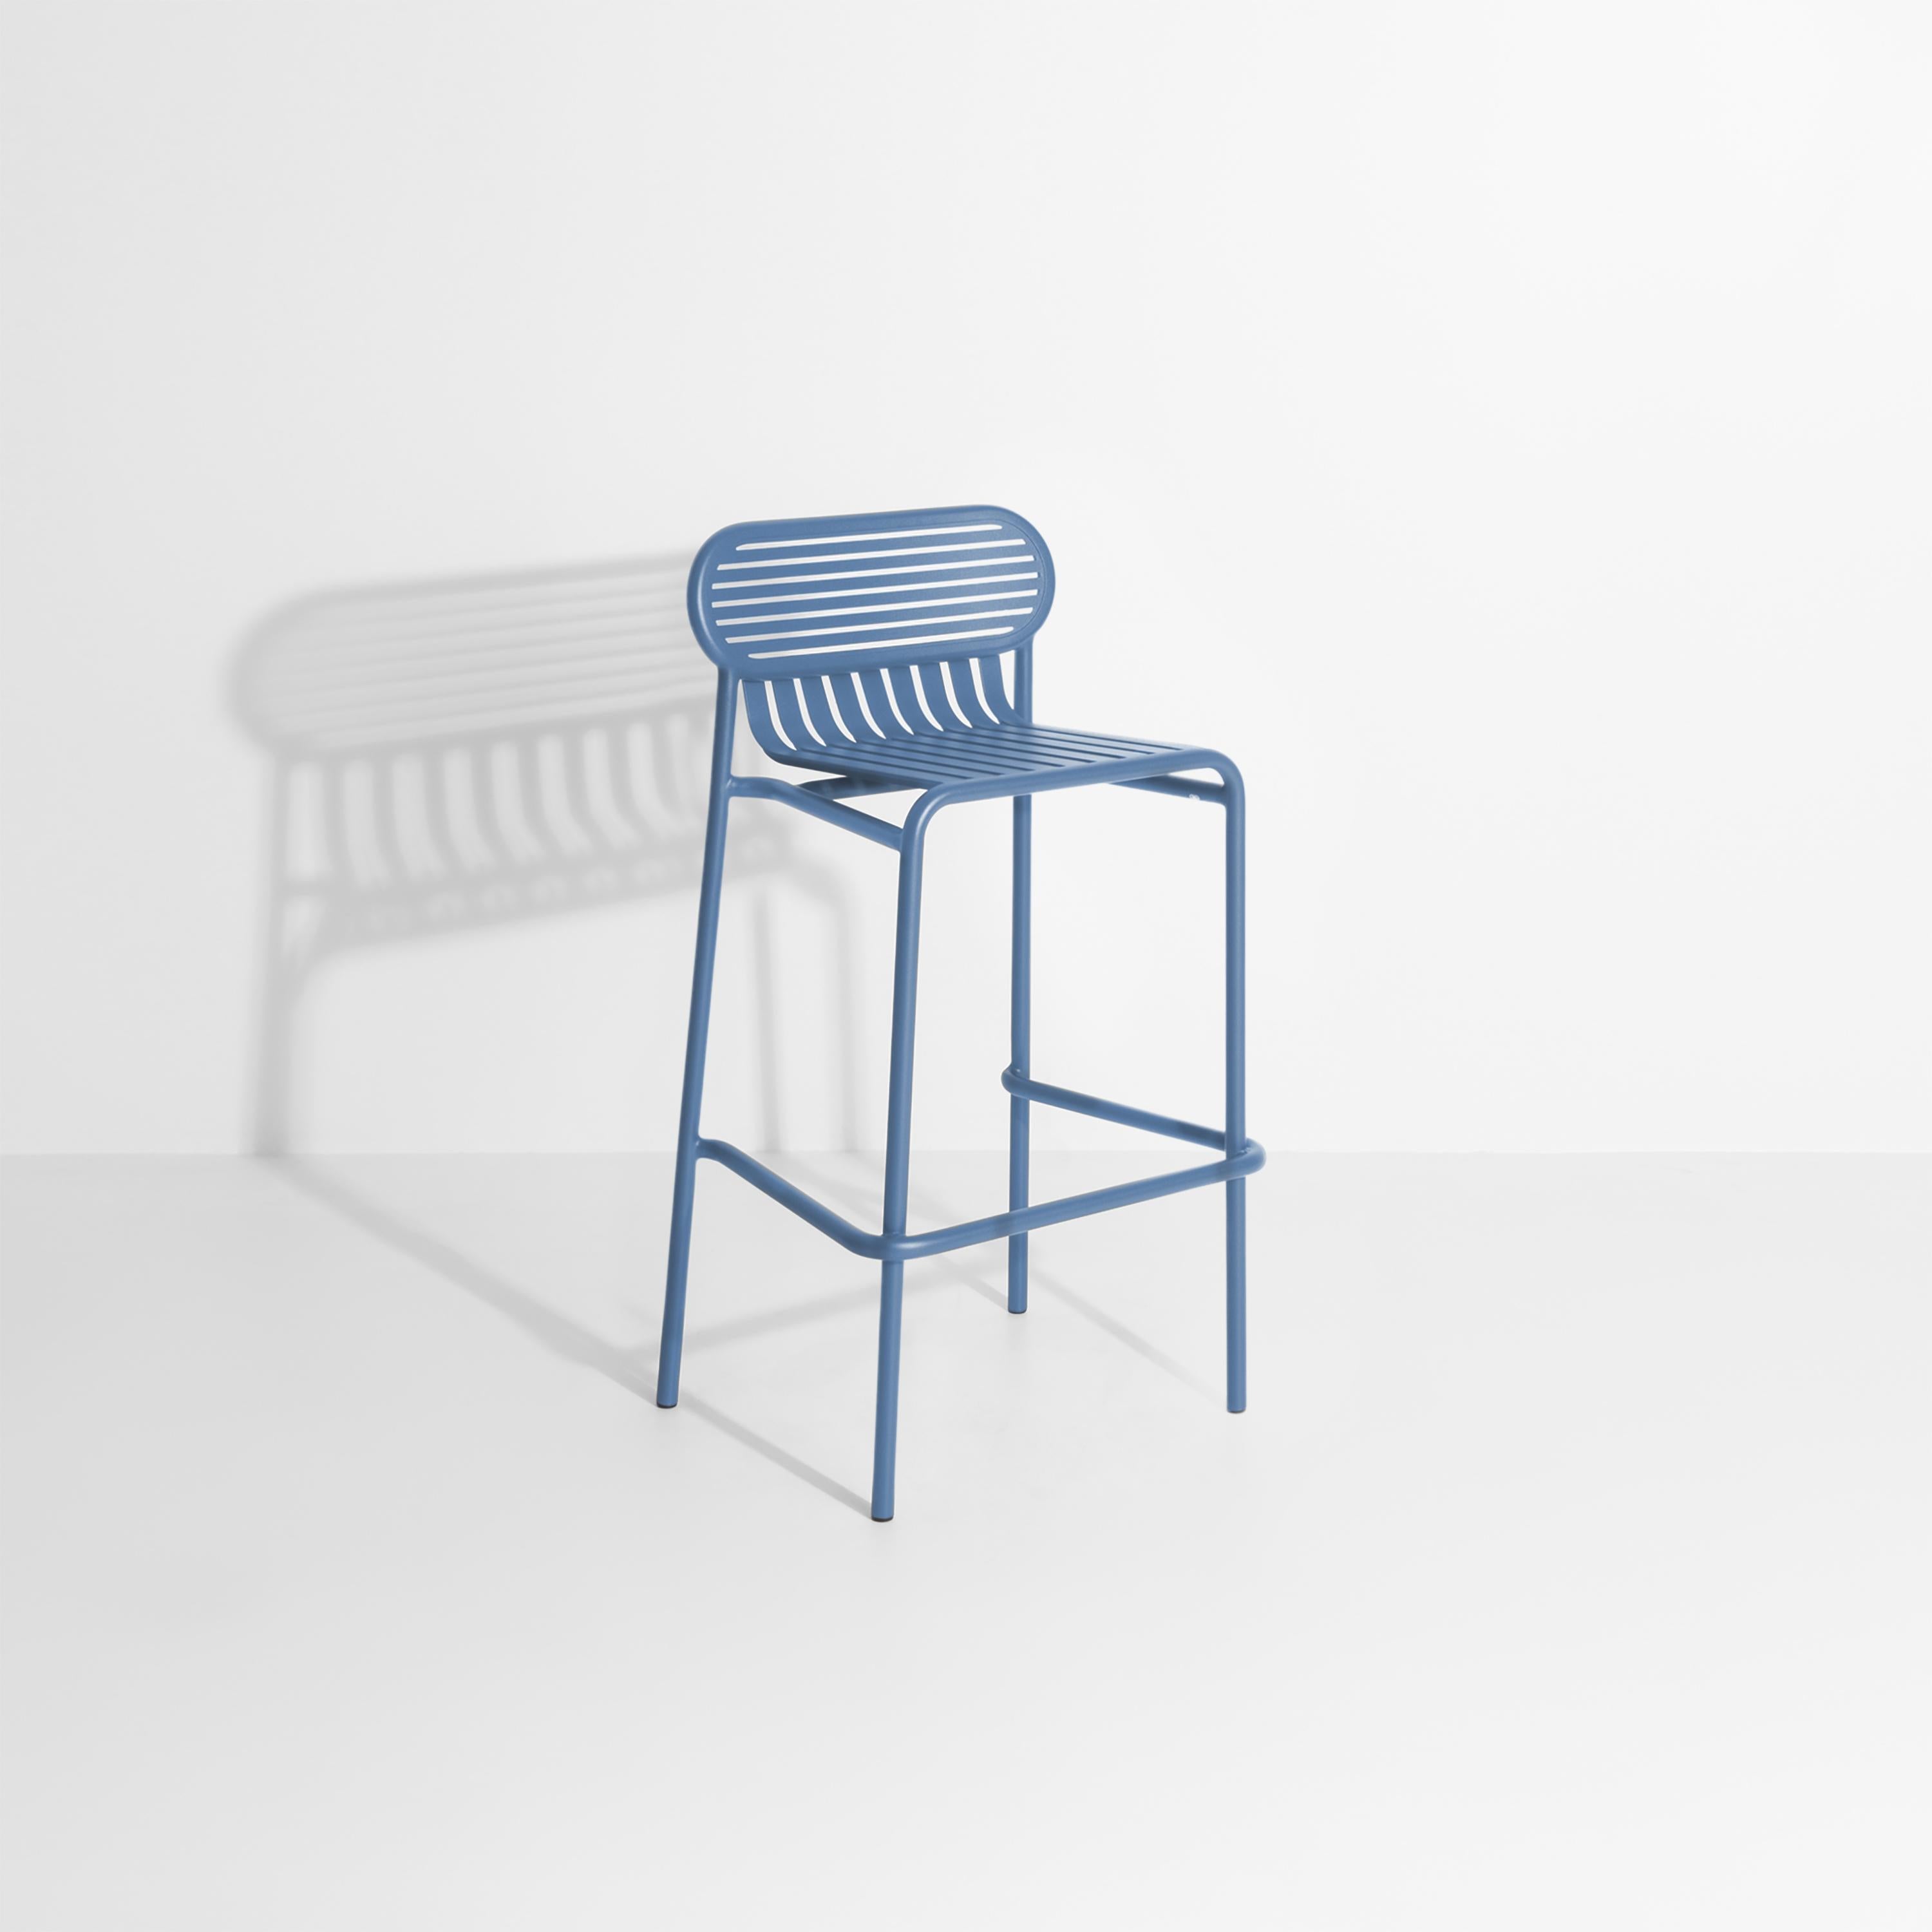 Petite Friture Week-End Bar Stool in Azur Blue Aluminium by Studio BrichetZiegler, 2017

The week-end collection is a full range of outdoor furniture, in aluminium grained epoxy paint, matt finish, that includes 18 functions and 8 colours for the